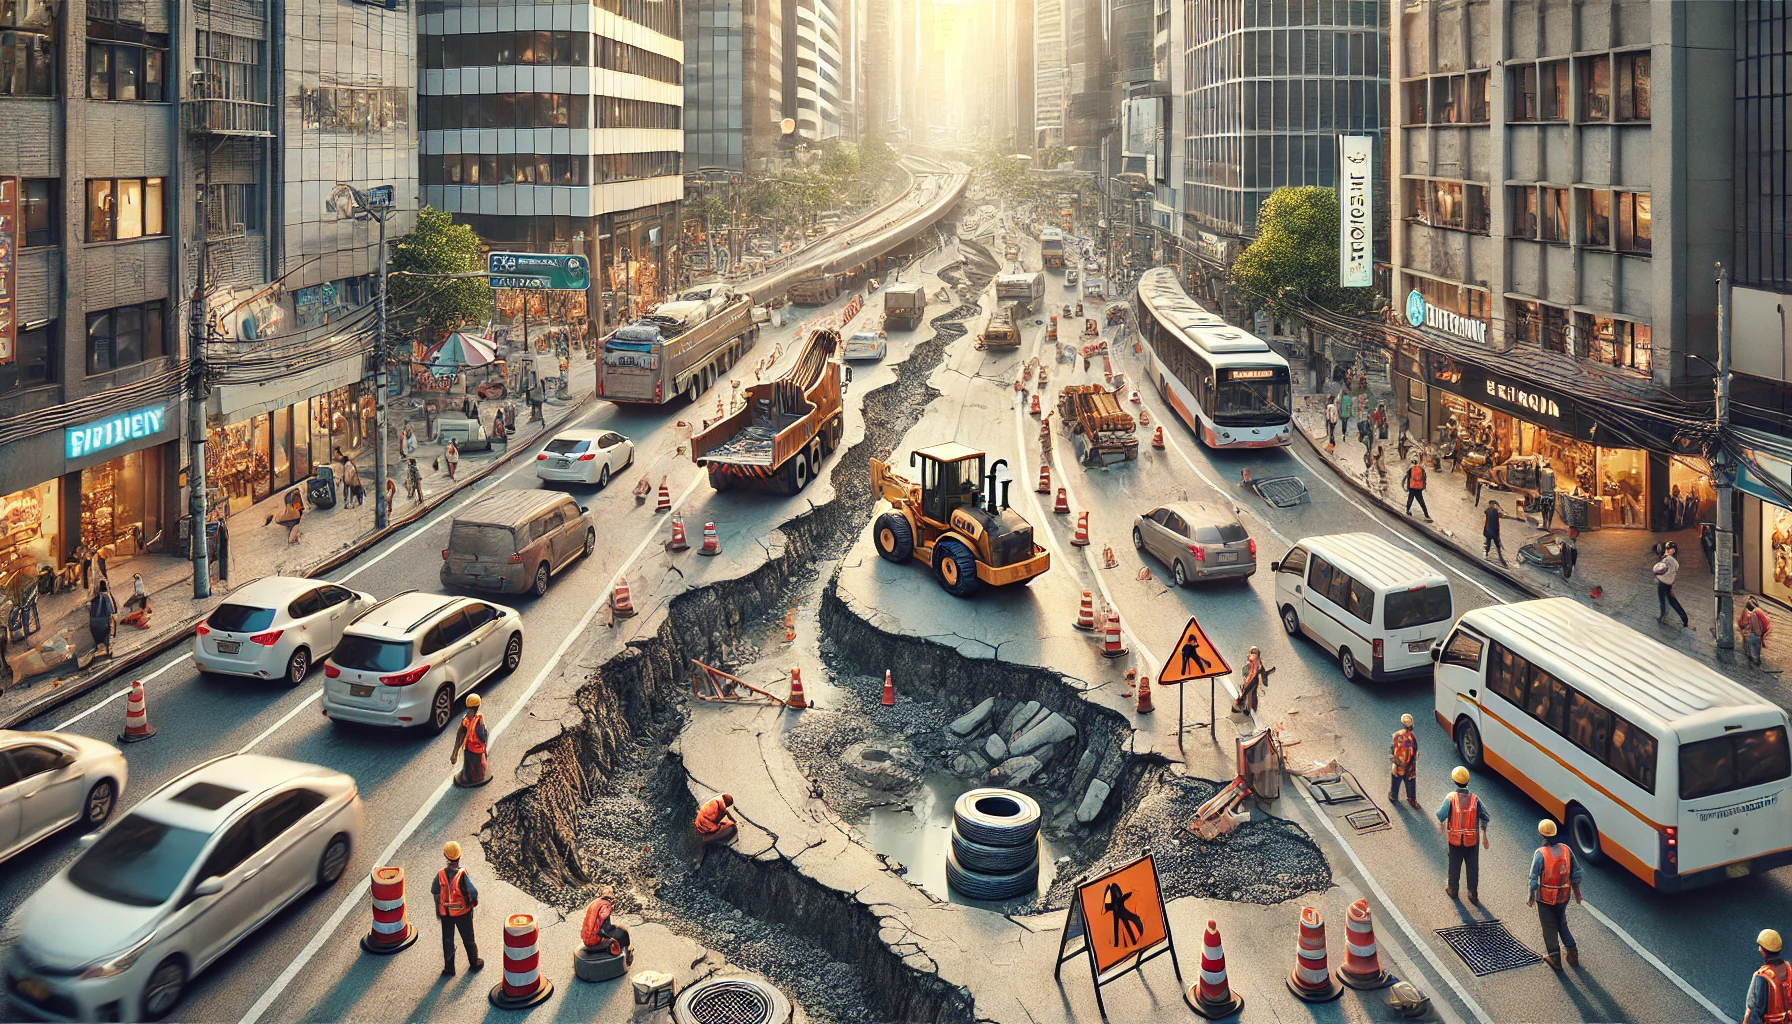 "Road maintenance challenges in urban areas, showcasing a busy street with potholes, construction workers, heavy traffic, and detour signs amidst tall modern buildings and bustling activity."